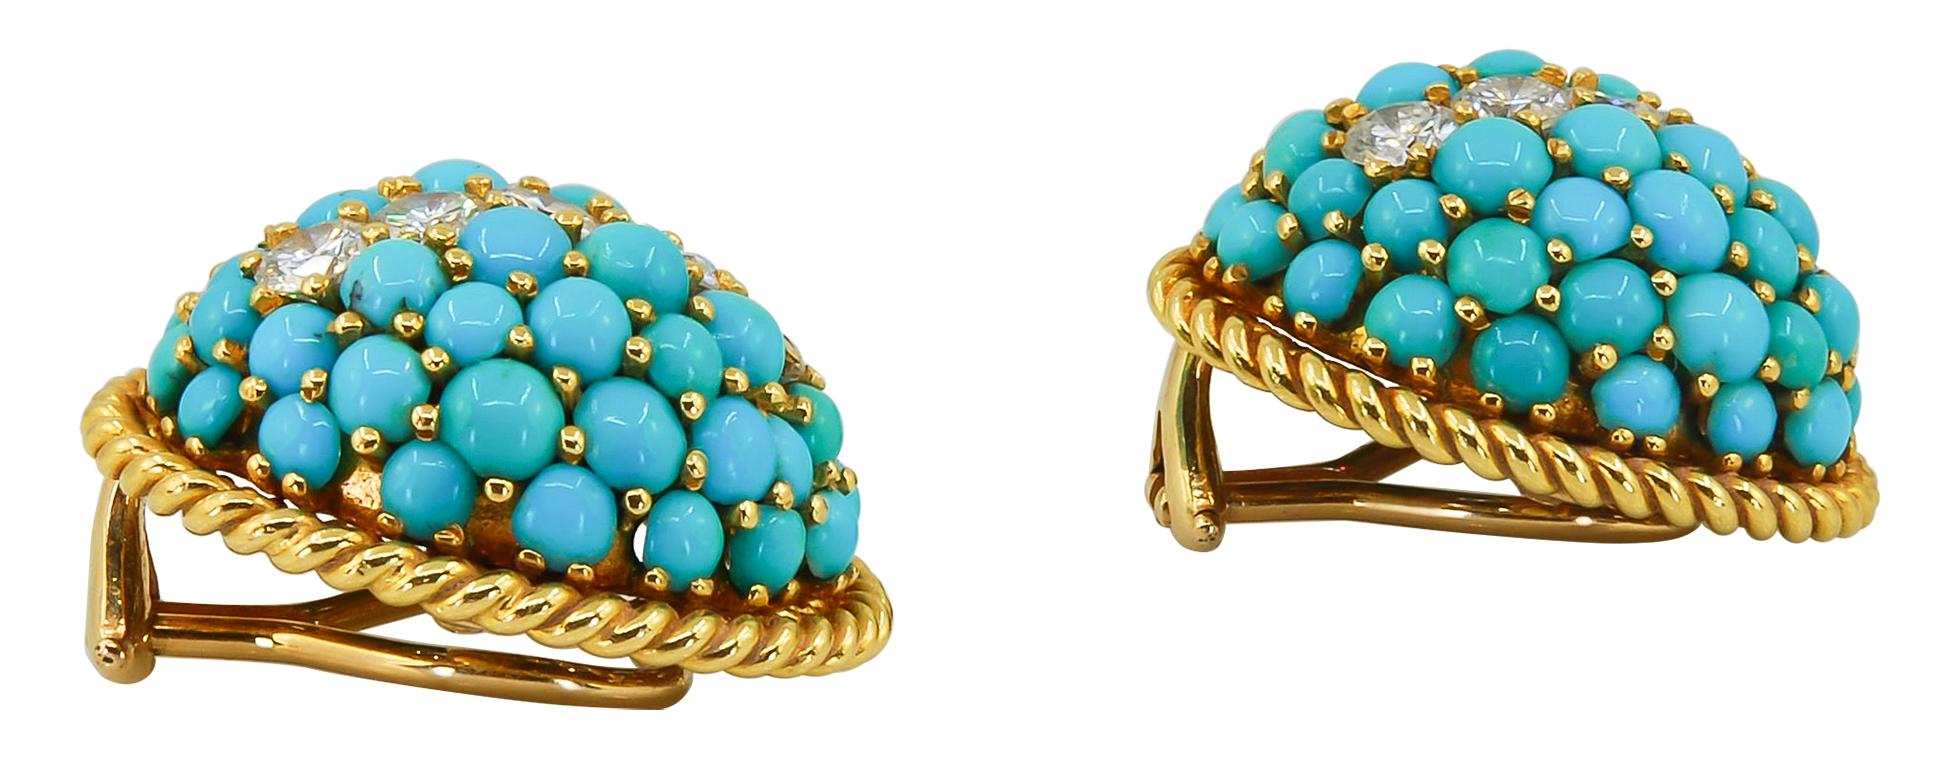 Retro-Style Turquoise Striped Dome Earrings in 18k Yellow Gold.

Turquoise cabochons create a 'petit point' style within these domed bombé earrings, accented by a stripe of round brilliant diamonds at their peak. The look is completed with a halo of